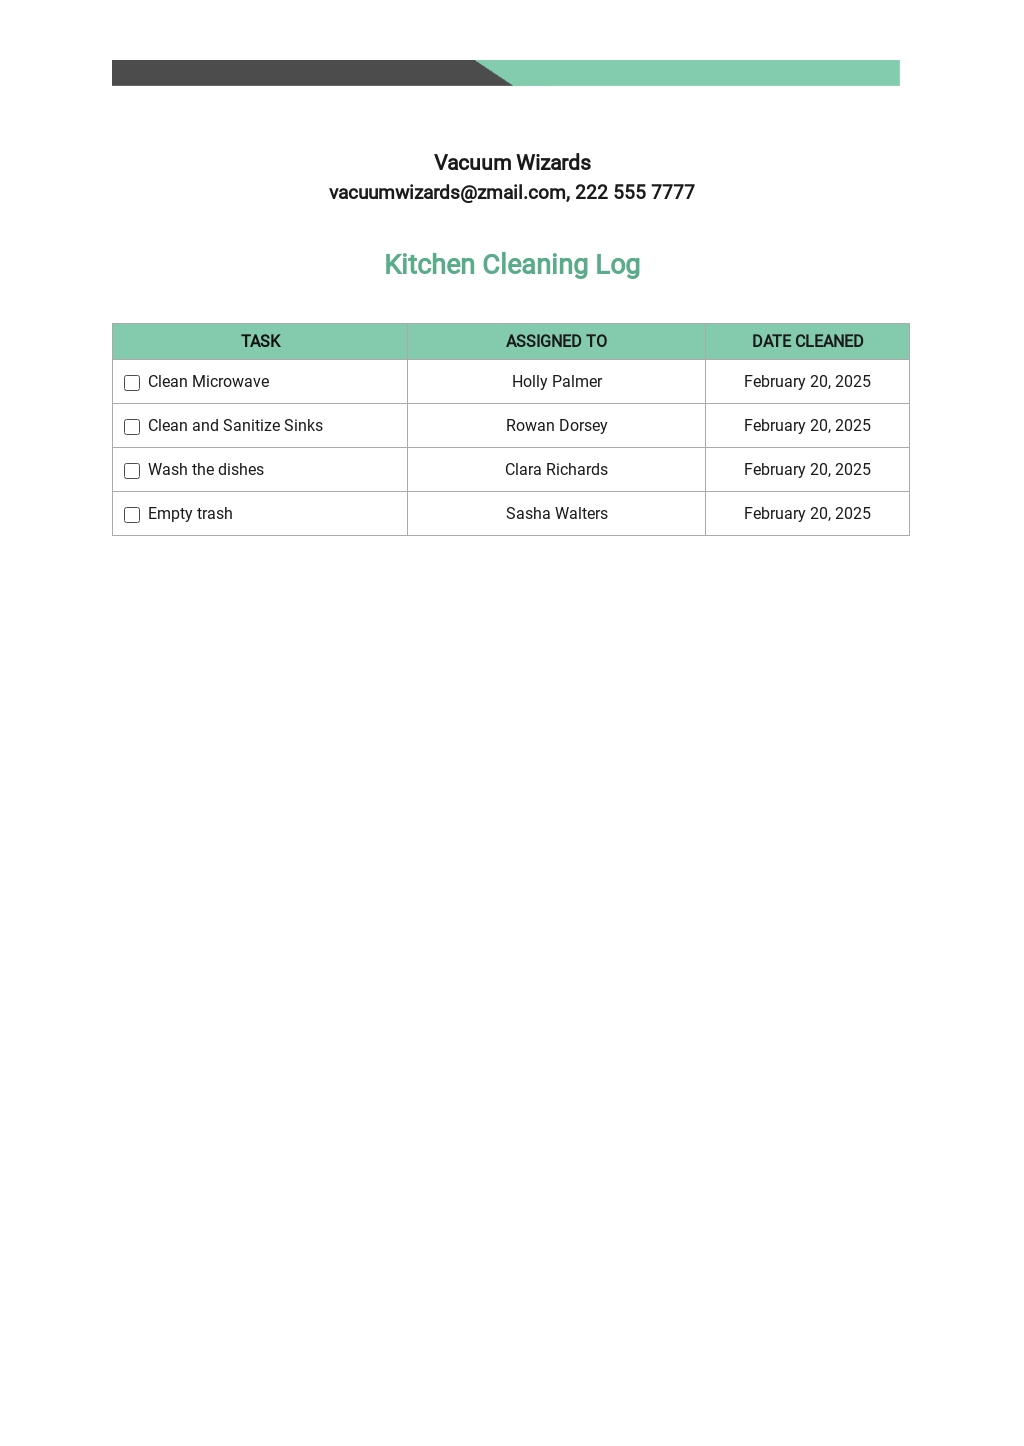 Kitchen Cleaning Log Template.jpe